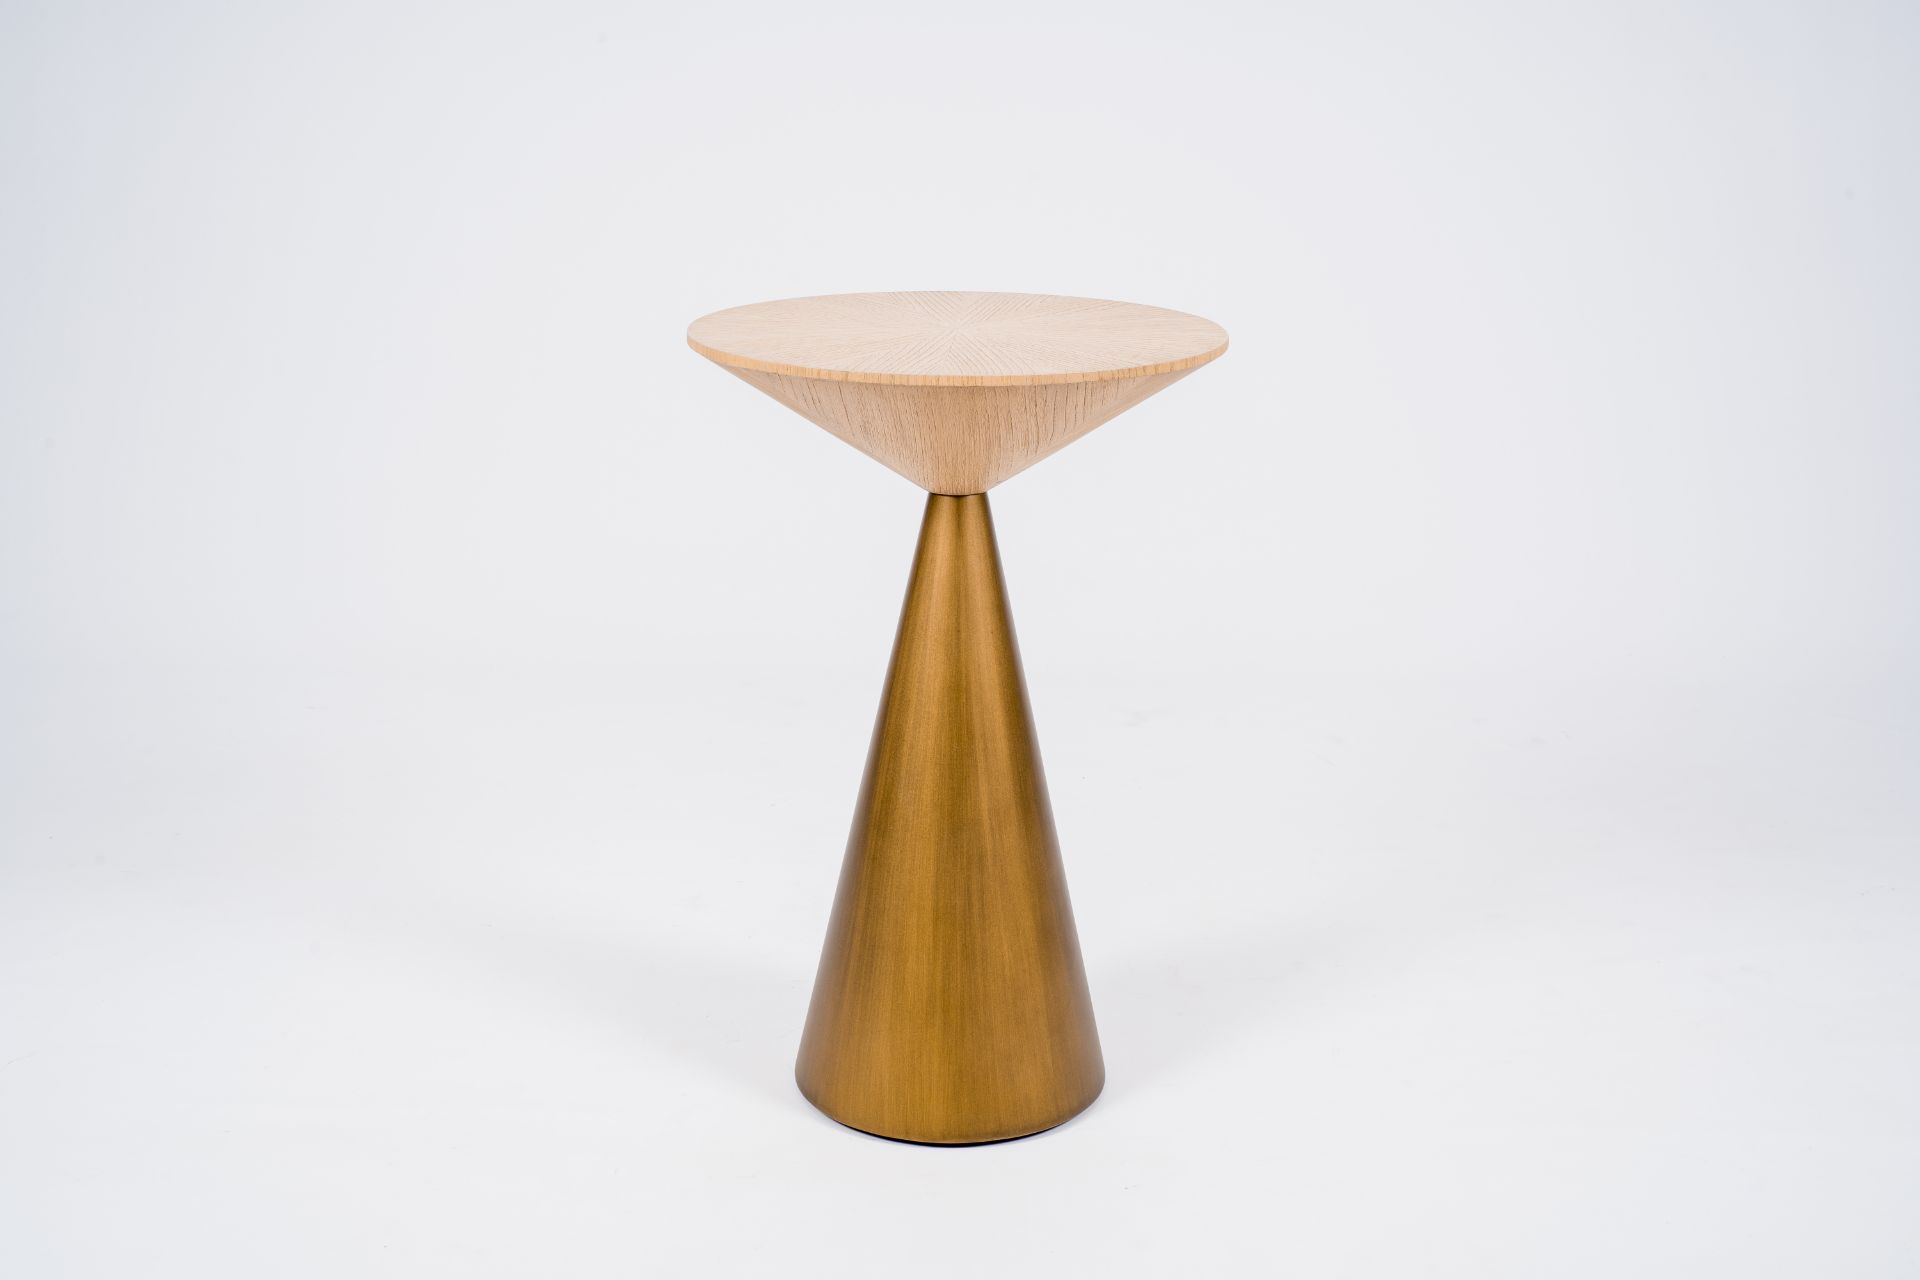 Olivier De Schrijver (1958): A partly gold-coloured solid wood Lily table, ed. 4/60, 21st C.